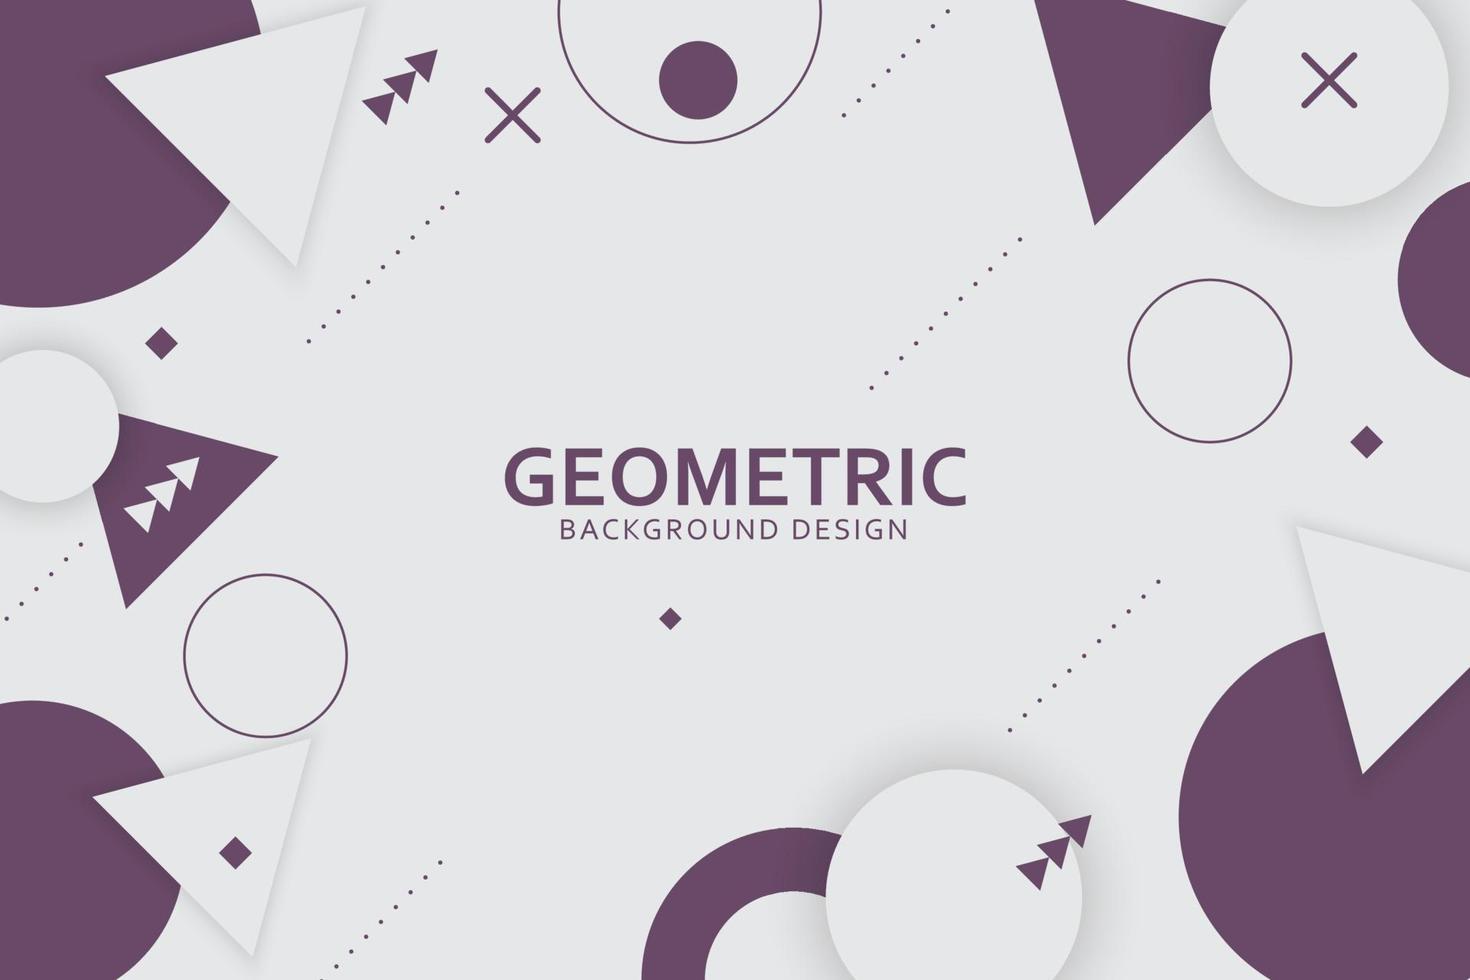 Geometric background with abstract shapes design vector